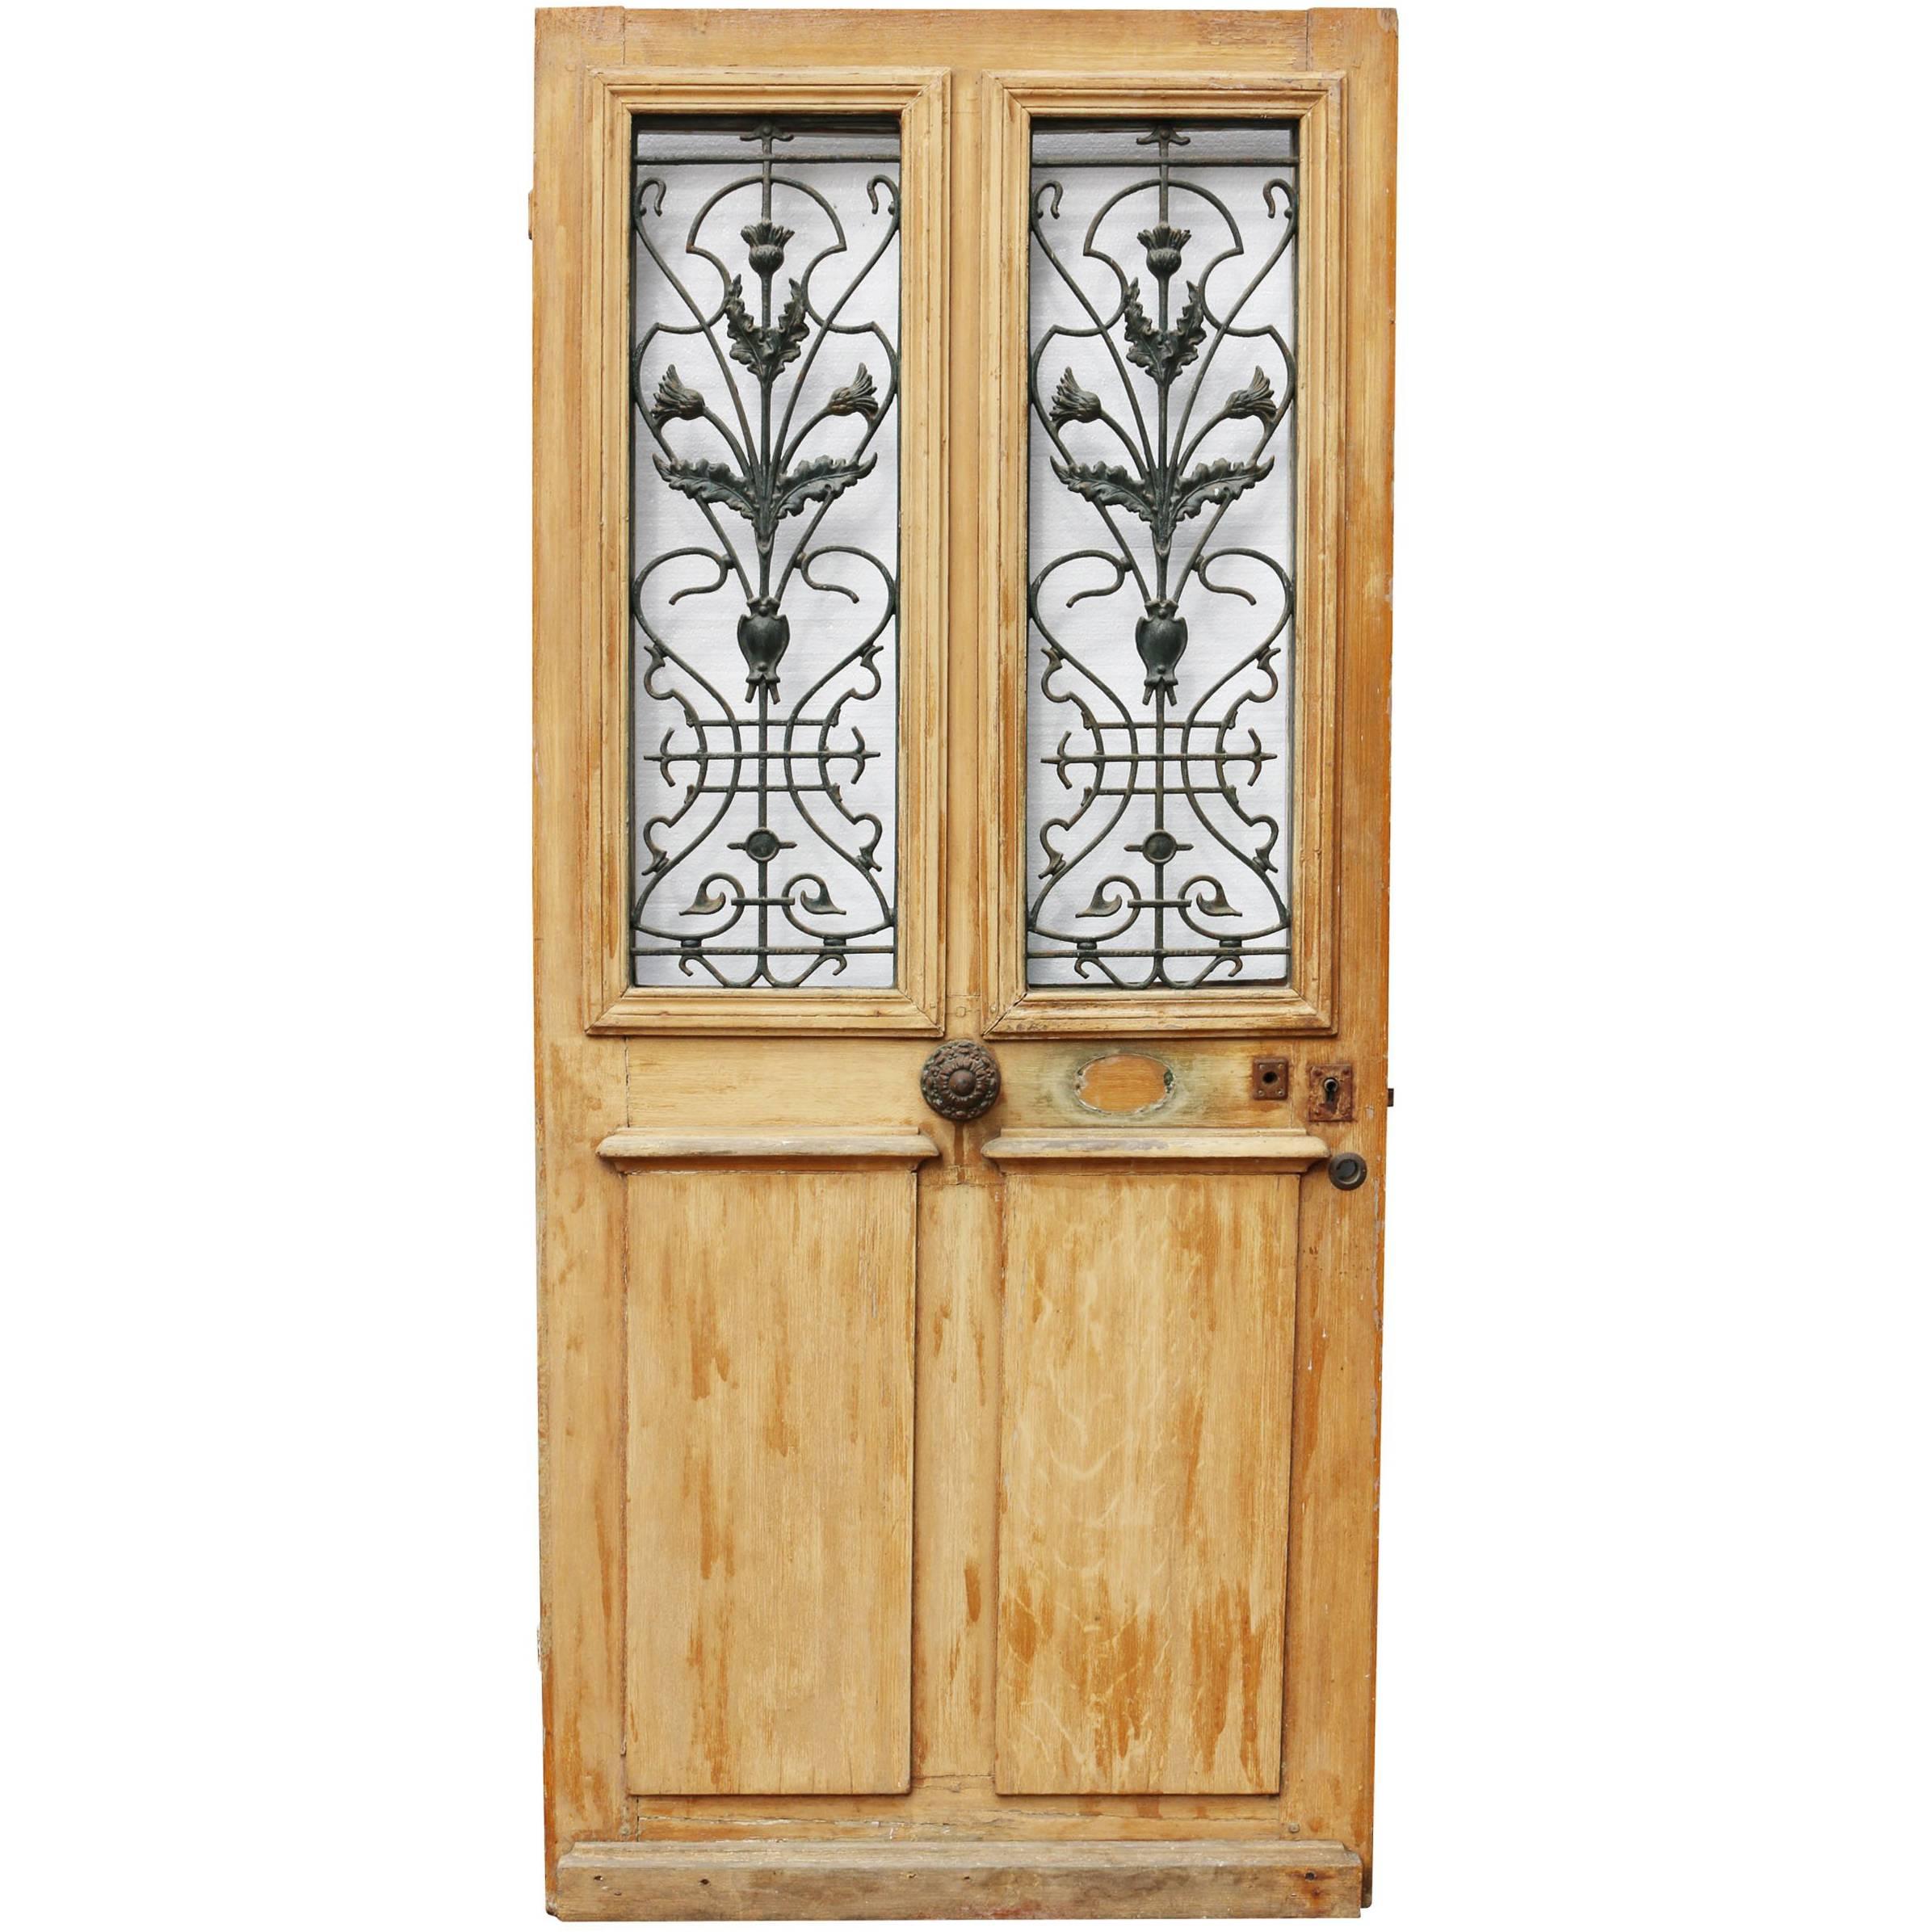 Late 19th Century French Painted Pine Front Door with Cast Iron Grills